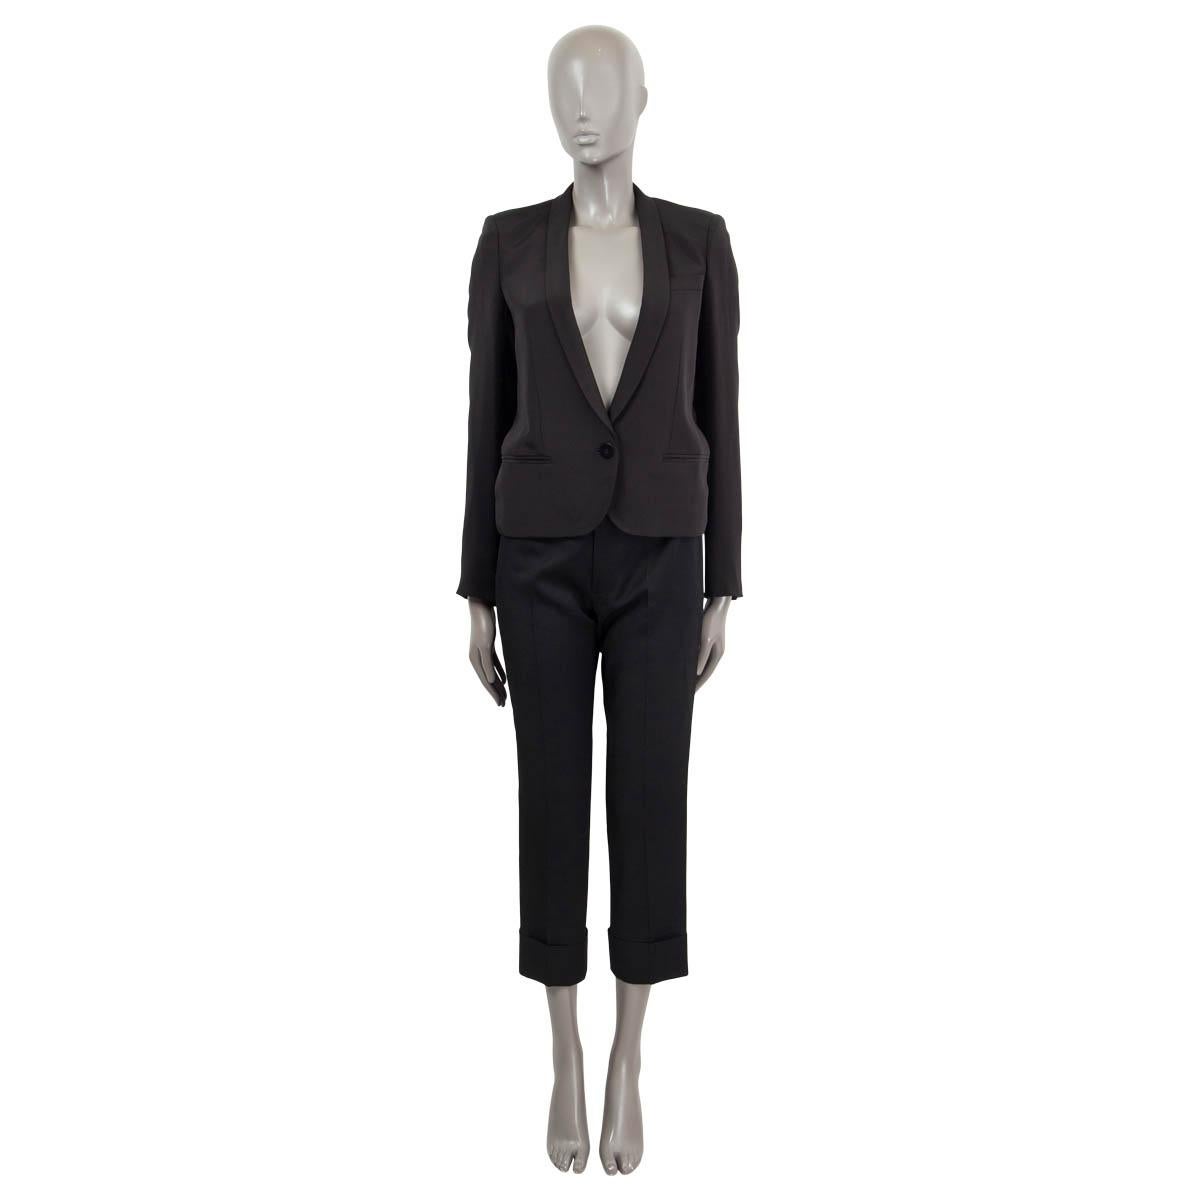 100% authentic Stella McCartney single button cropped blazer in black silk (100%). Two flap pockets and one chest pocket. Lined in black viscose (52%) and cotton (48%). Has been worn and is in excellent condition. 

Measurements
Tag